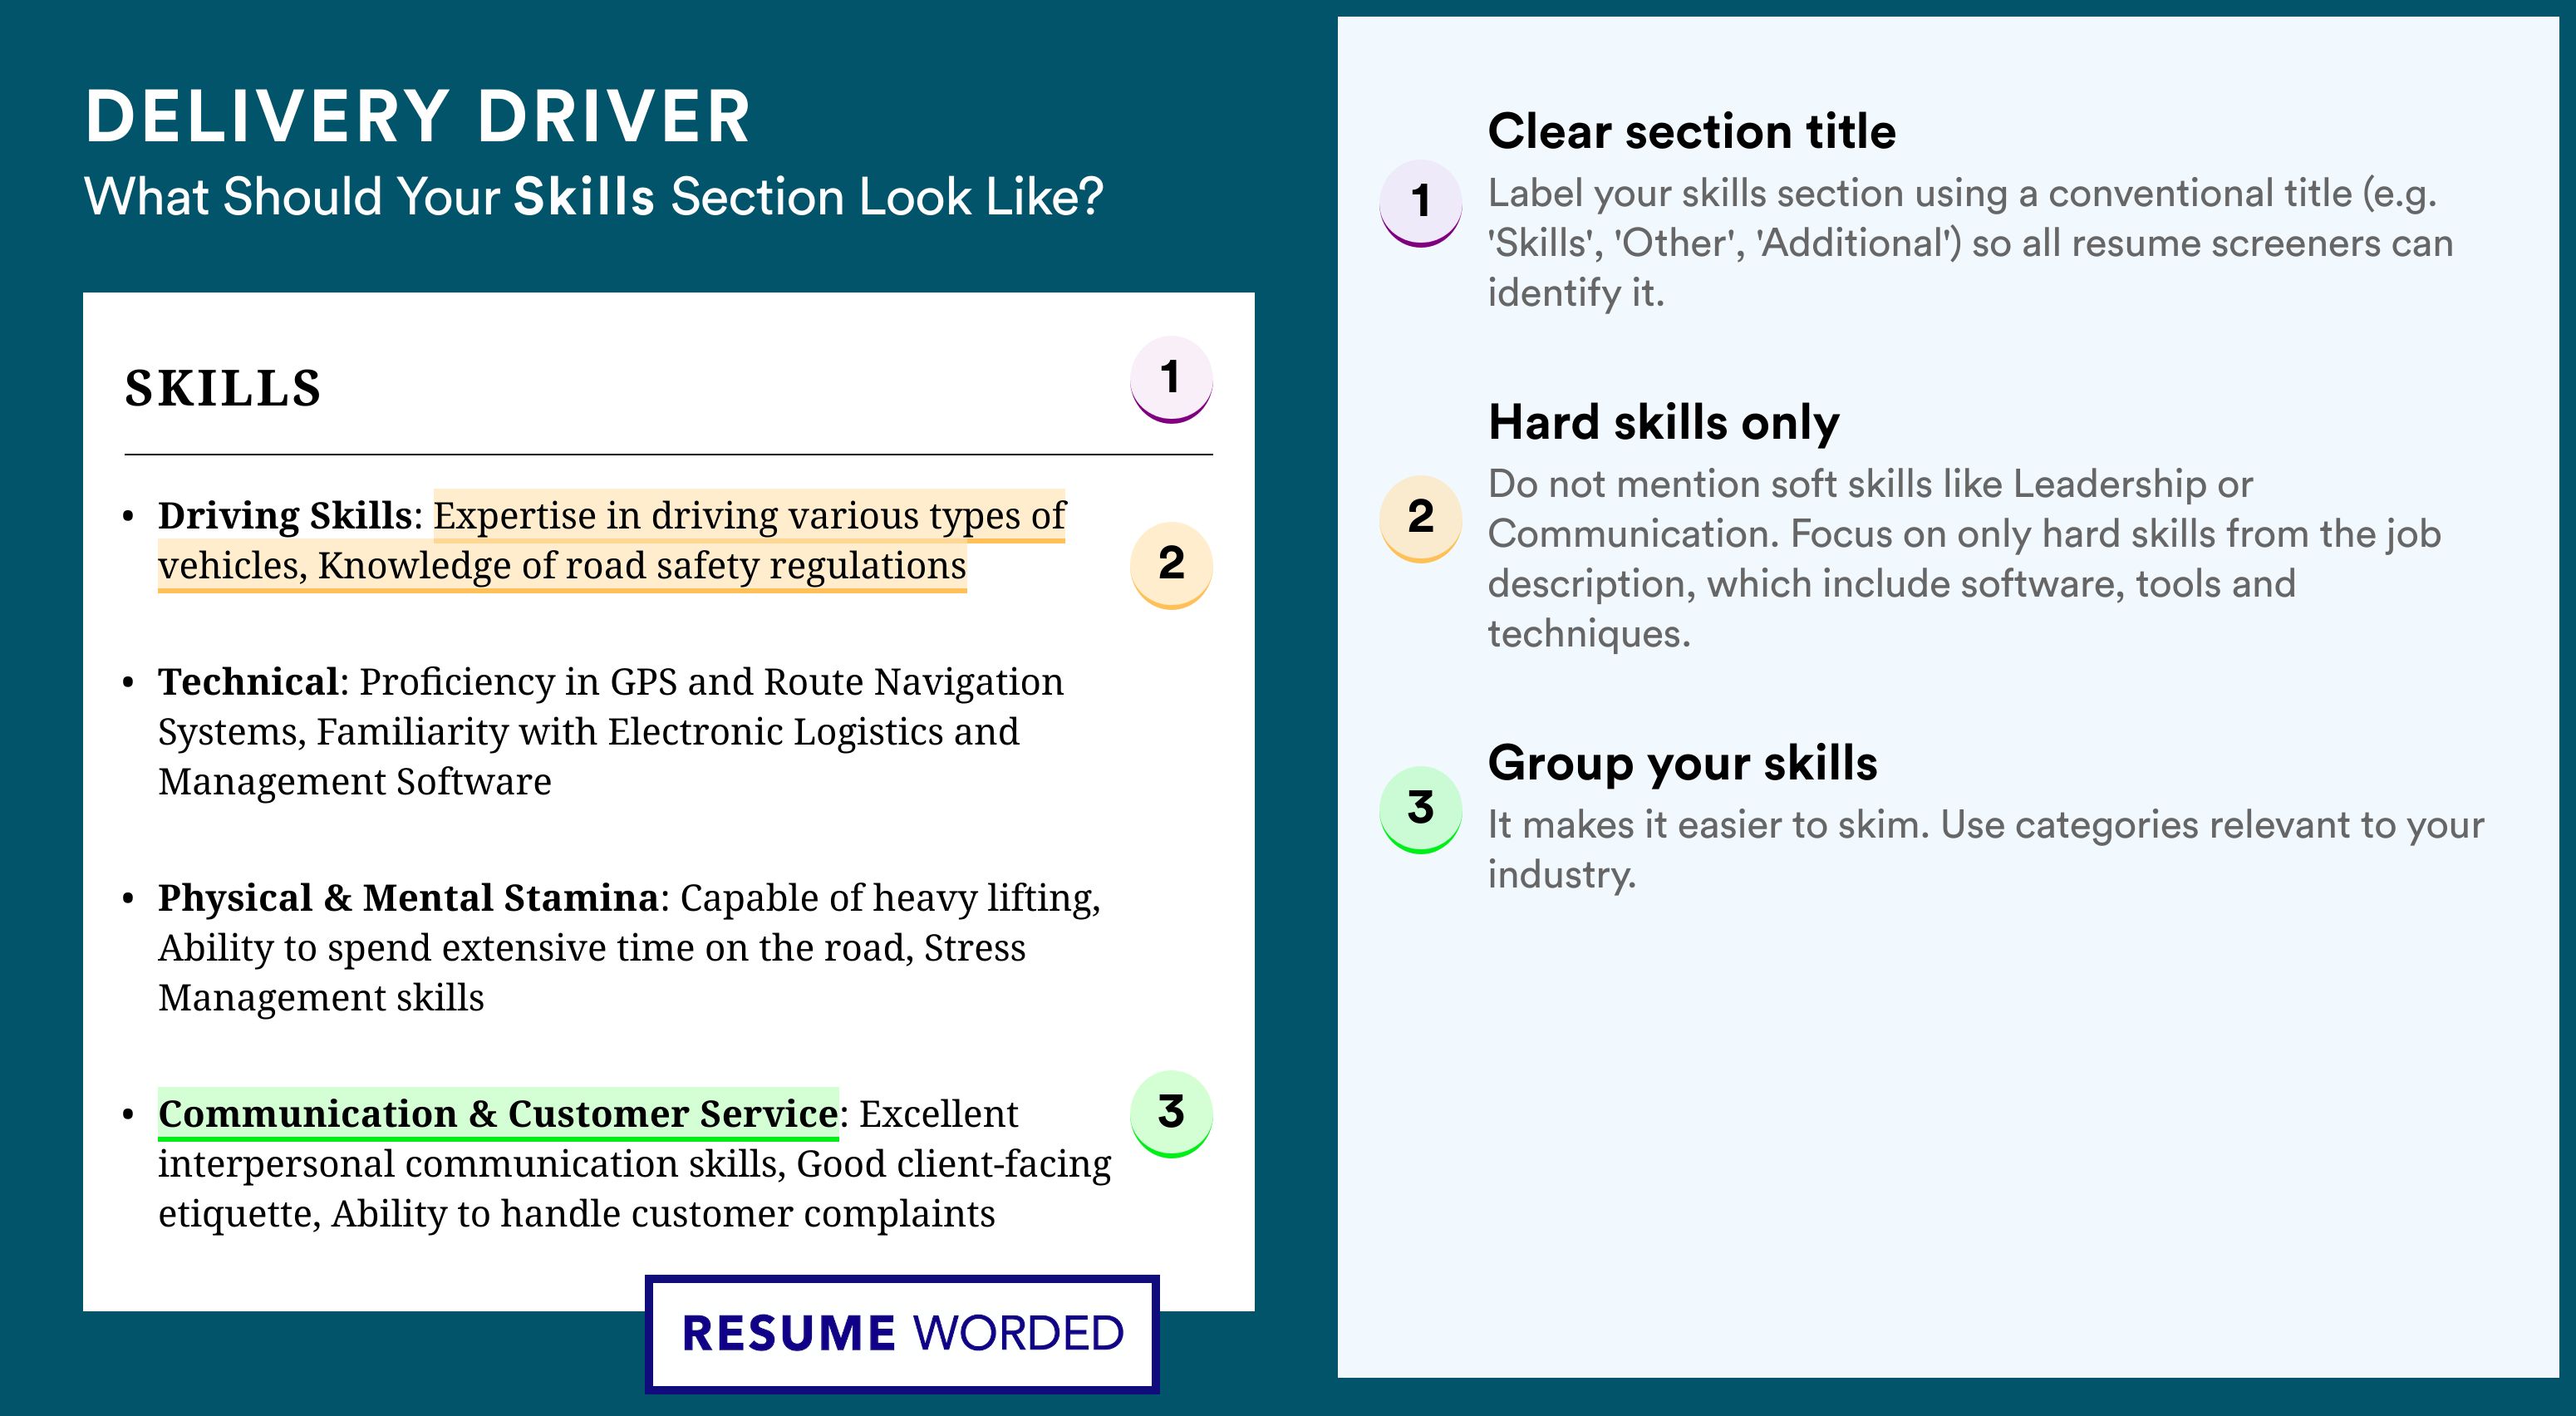 How To Write Your Skills Section - Delivery Driver Roles